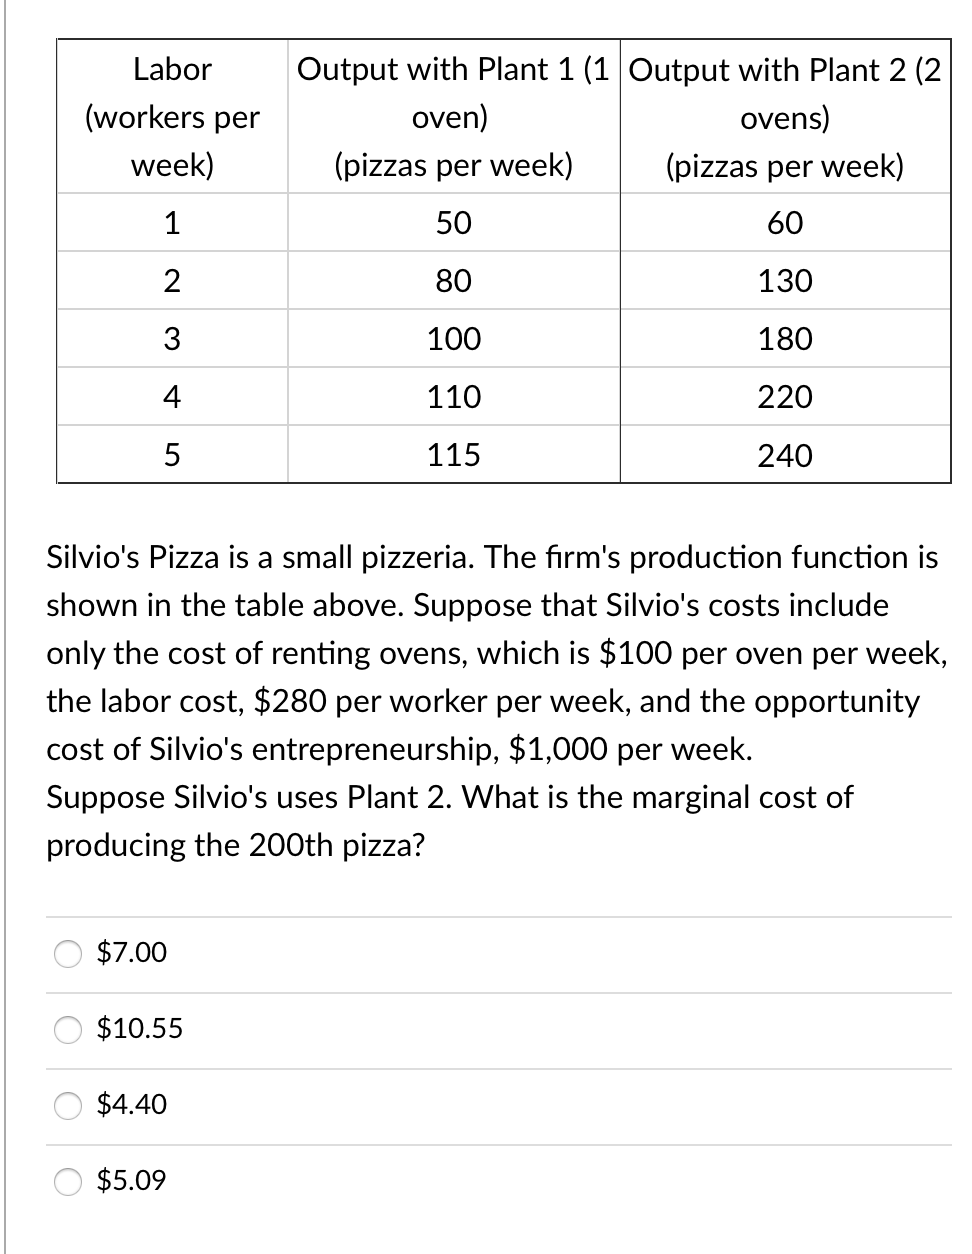 Labor
Output with Plant 1 (1 Output with Plant 2 (2
(workers per
oven)
ovens)
week)
(pizzas per week)
(pizzas per week)
1
50
60
80
130
3
100
180
4
110
220
5
115
240
Silvio's Pizza is a small pizzeria. The firm's production function is
shown in the table above. Suppose that Silvio's costs include
only the cost of renting ovens, which is $100 per oven per week,
the labor cost, $280 per worker per week, and the opportunity
cost of Silvio's entrepreneurship, $1,000 per week.
Suppose Silvio's uses Plant 2. What is the marginal cost of
producing the 200th pizza?
$7.00
$10.55
$4.40
$5.09
